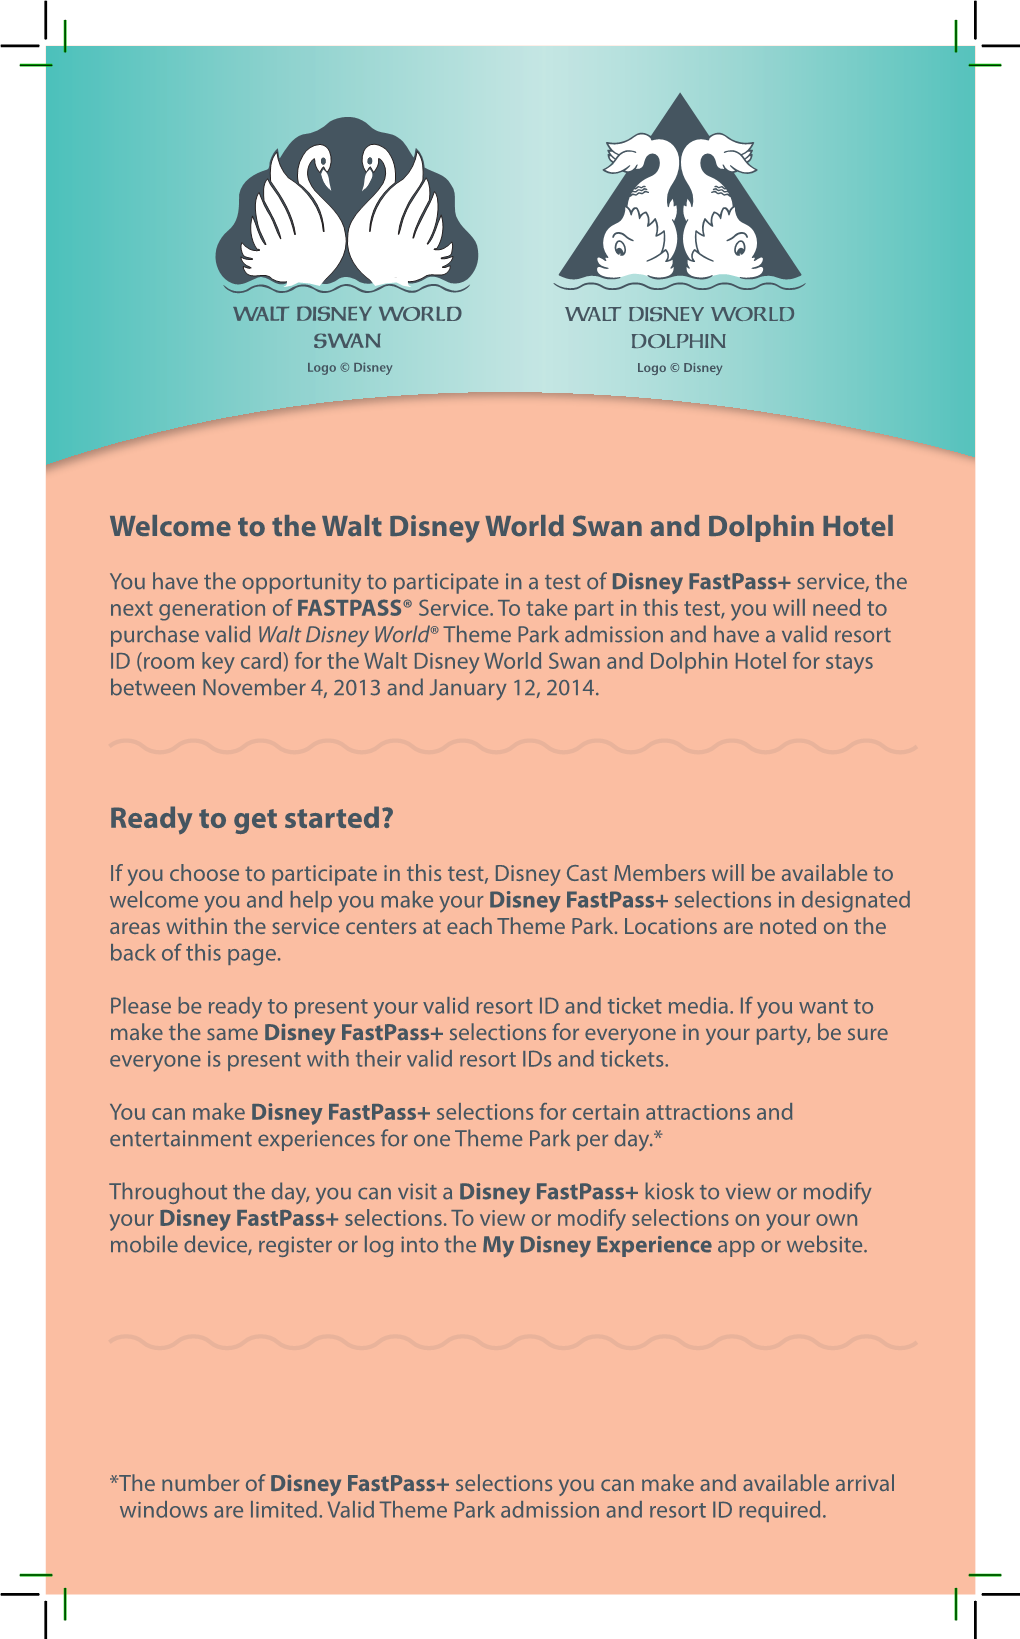 The Walt Disney World Swan and Dolphin Hotel Ready to Get Started?